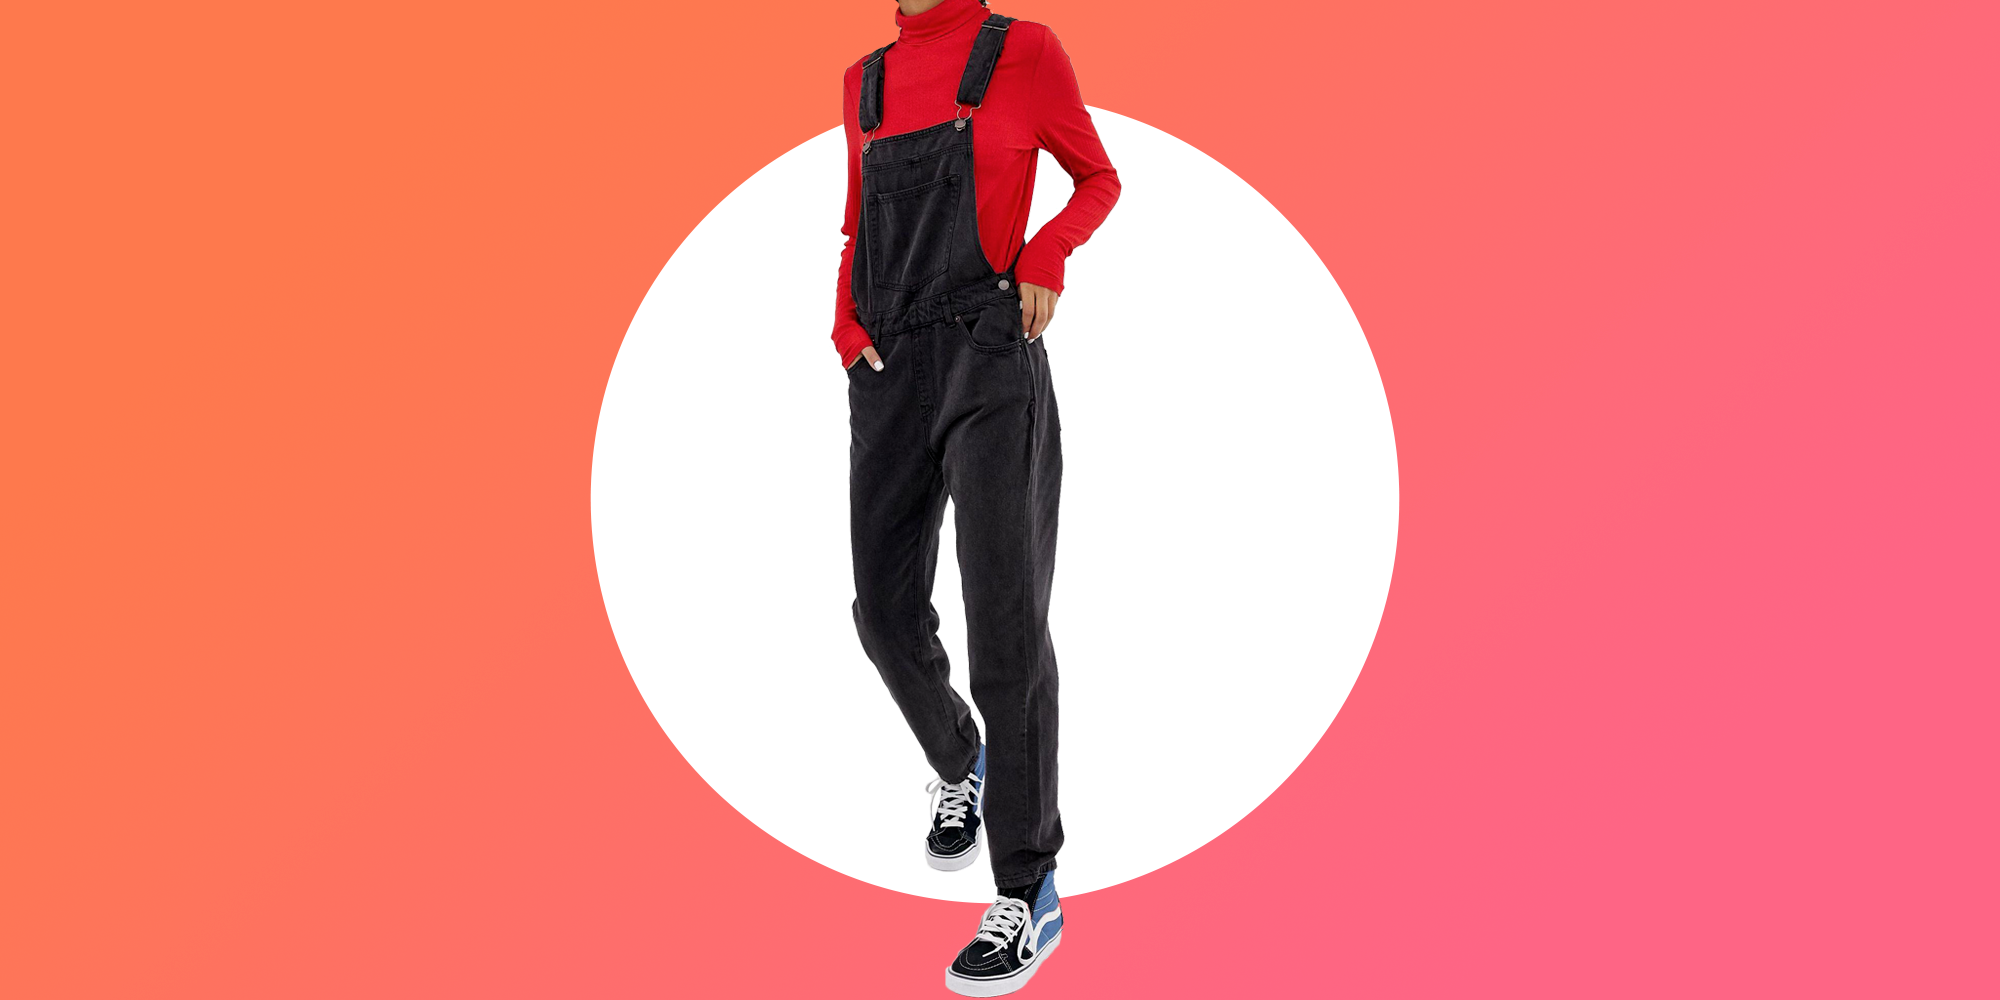 red overall outfit